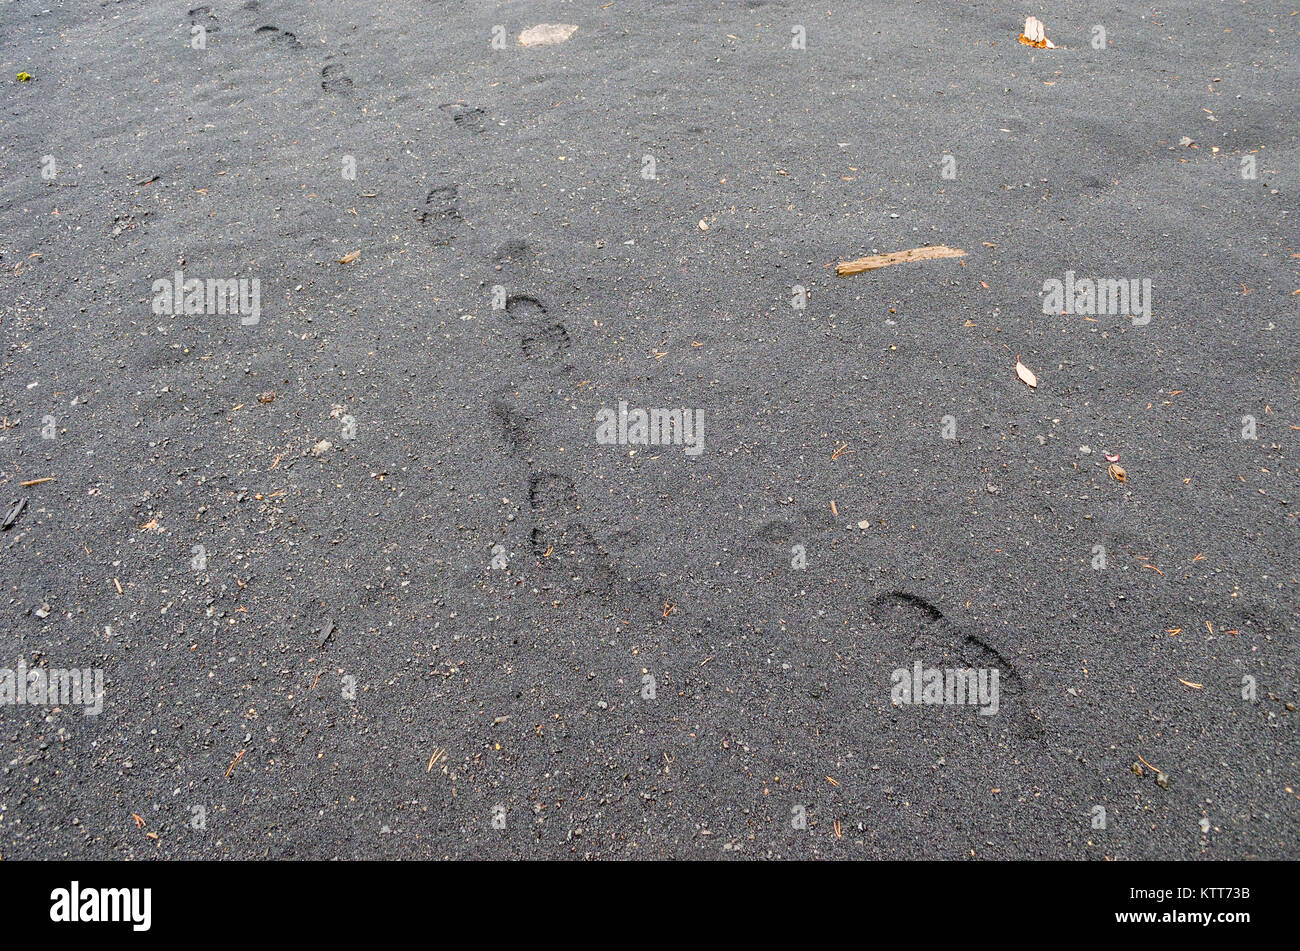 Footprints on slag heaps. Postindustrial landscape of abandoned nickel smelter in Evje, Norway, during foggy rainy day of late autumn. Stock Photo